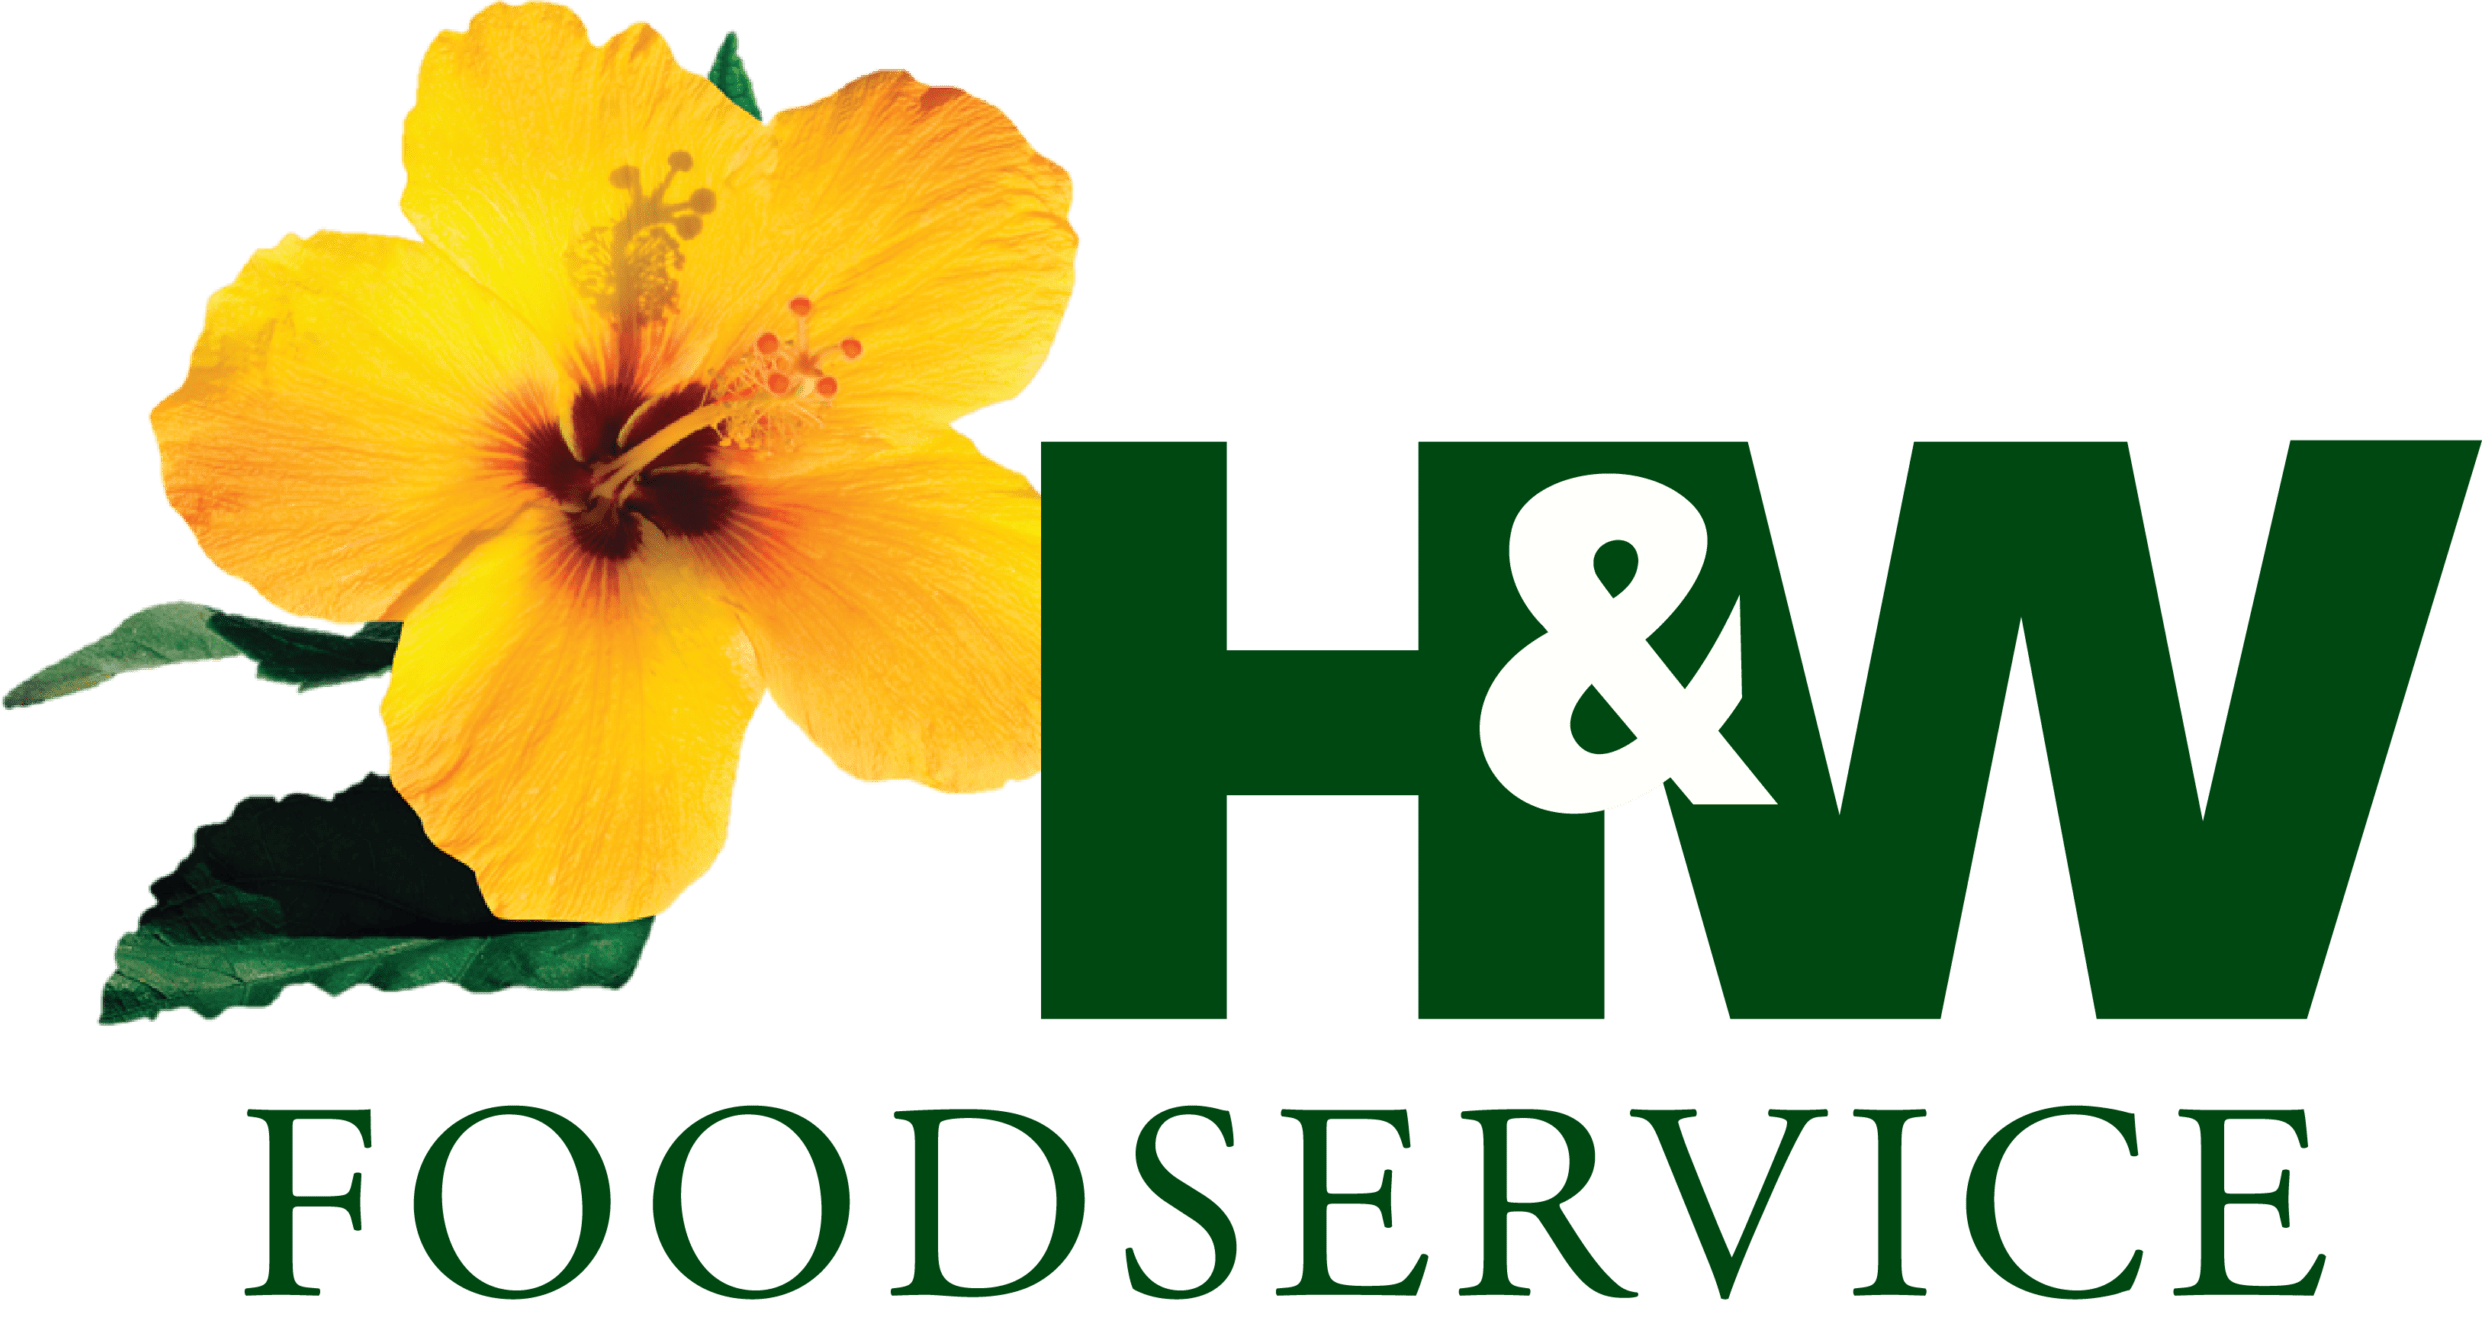 H&W Foodservice